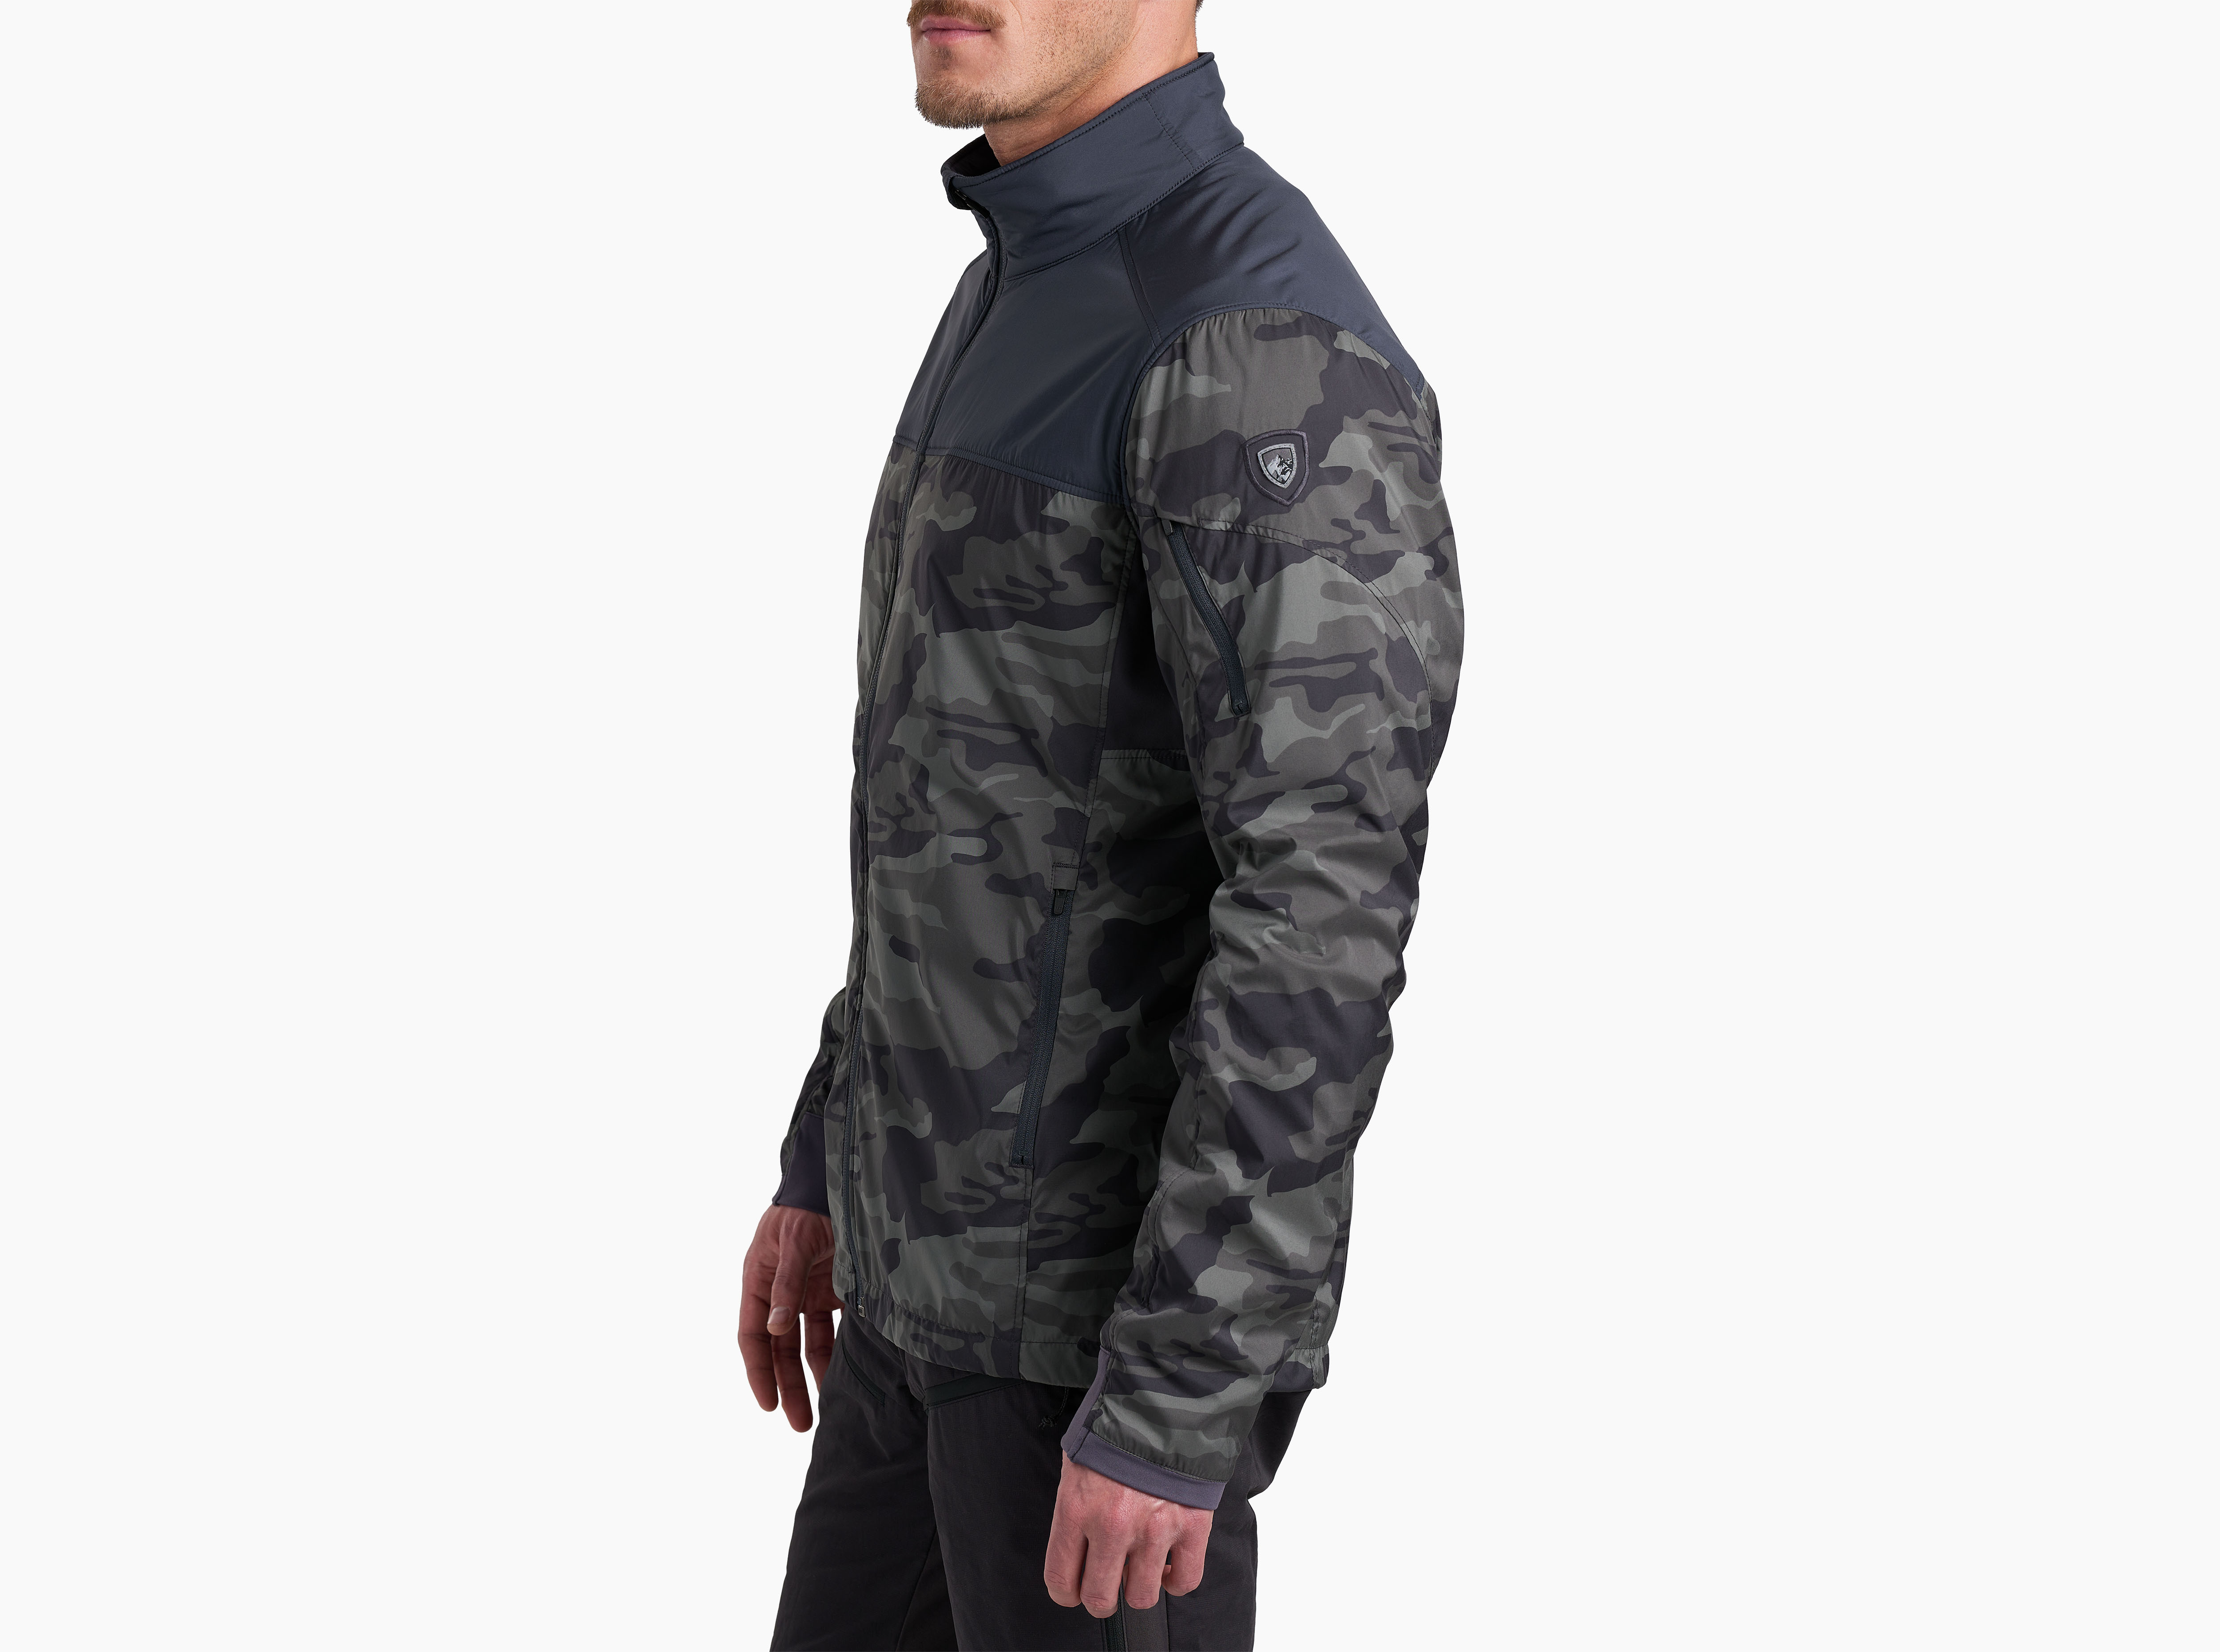 The One™ Jacket in Men's Outerwear